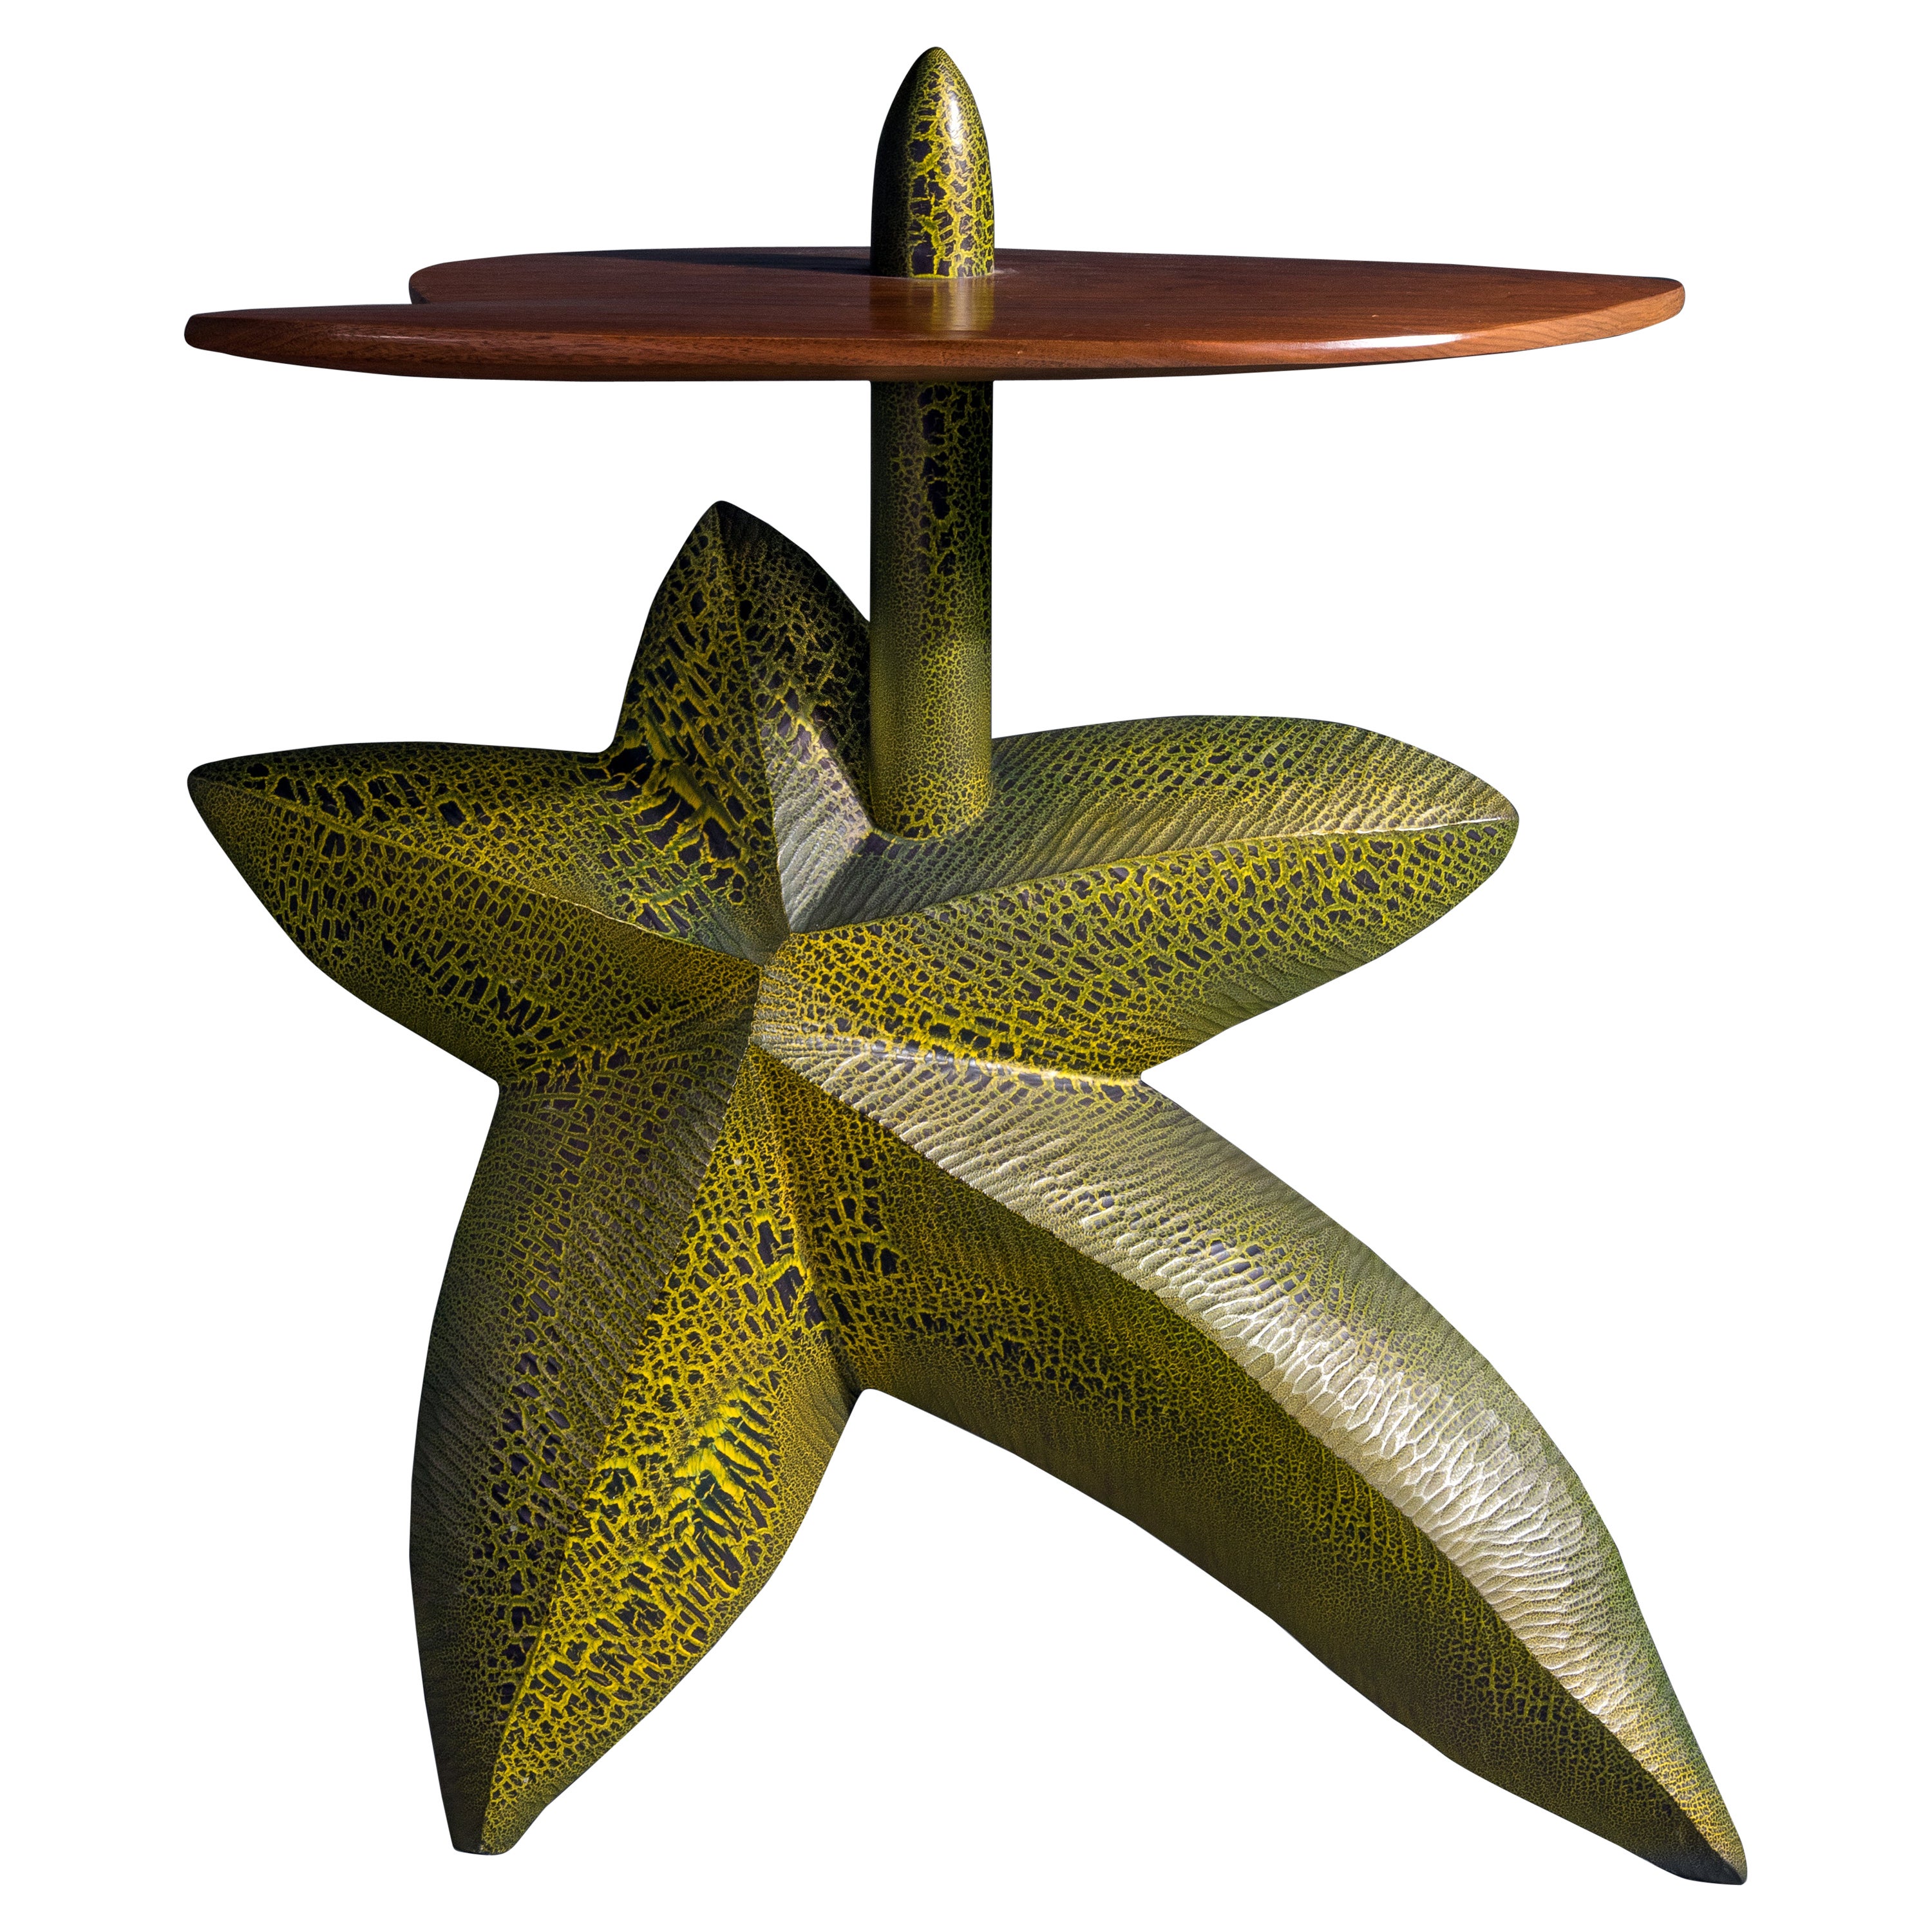 Wendell Castle Starfish Console Table in Polychromed and Stained Woods, 1995